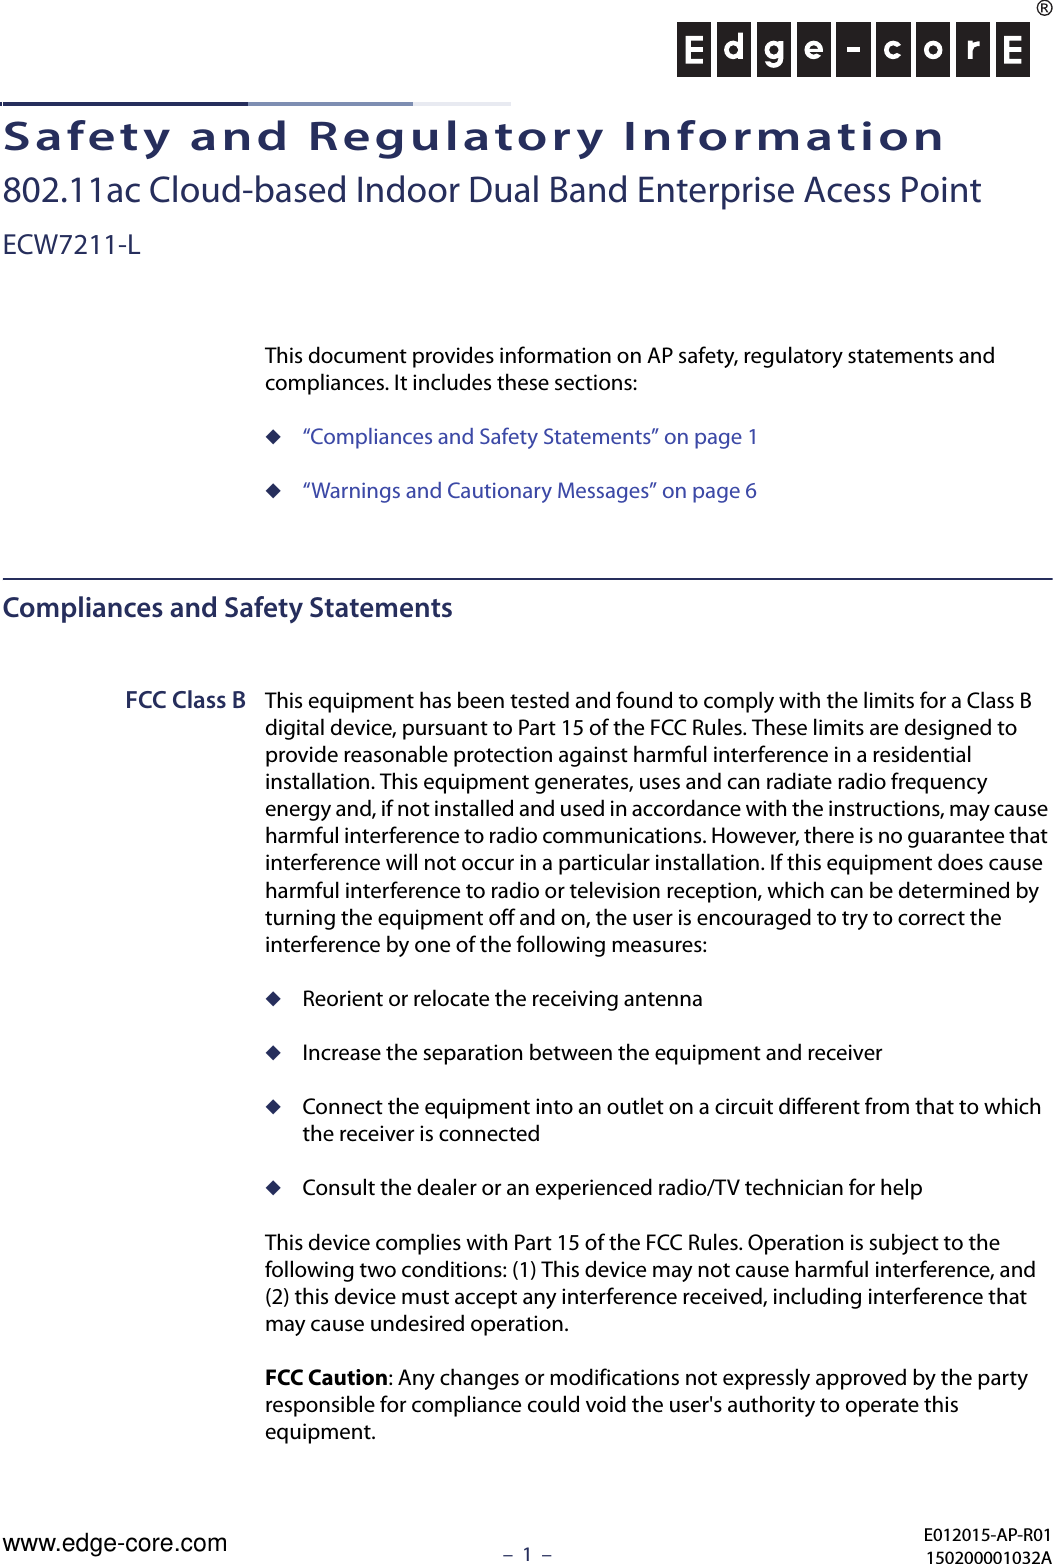 –  1  –Safety and Regulatory Information802.11ac Cloud-based Indoor Dual Band Enterprise Acess PointECW7211-LThis document provides information on AP safety, regulatory statements and compliances. It includes these sections:◆“Compliances and Safety Statements” on page 1◆“Warnings and Cautionary Messages” on page 6Compliances and Safety StatementsFCC Class B This equipment has been tested and found to comply with the limits for a Class B digital device, pursuant to Part 15 of the FCC Rules. These limits are designed to provide reasonable protection against harmful interference in a residential installation. This equipment generates, uses and can radiate radio frequency energy and, if not installed and used in accordance with the instructions, may cause harmful interference to radio communications. However, there is no guarantee that interference will not occur in a particular installation. If this equipment does cause harmful interference to radio or television reception, which can be determined by turning the equipment off and on, the user is encouraged to try to correct the interference by one of the following measures:◆Reorient or relocate the receiving antenna◆Increase the separation between the equipment and receiver◆Connect the equipment into an outlet on a circuit different from that to which the receiver is connected◆Consult the dealer or an experienced radio/TV technician for helpThis device complies with Part 15 of the FCC Rules. Operation is subject to the following two conditions: (1) This device may not cause harmful interference, and (2) this device must accept any interference received, including interference that may cause undesired operation.FCC Caution: Any changes or modifications not expressly approved by the party responsible for compliance could void the user&apos;s authority to operate this equipment. E012015-AP-R01150200001032Awww.edge-core.com